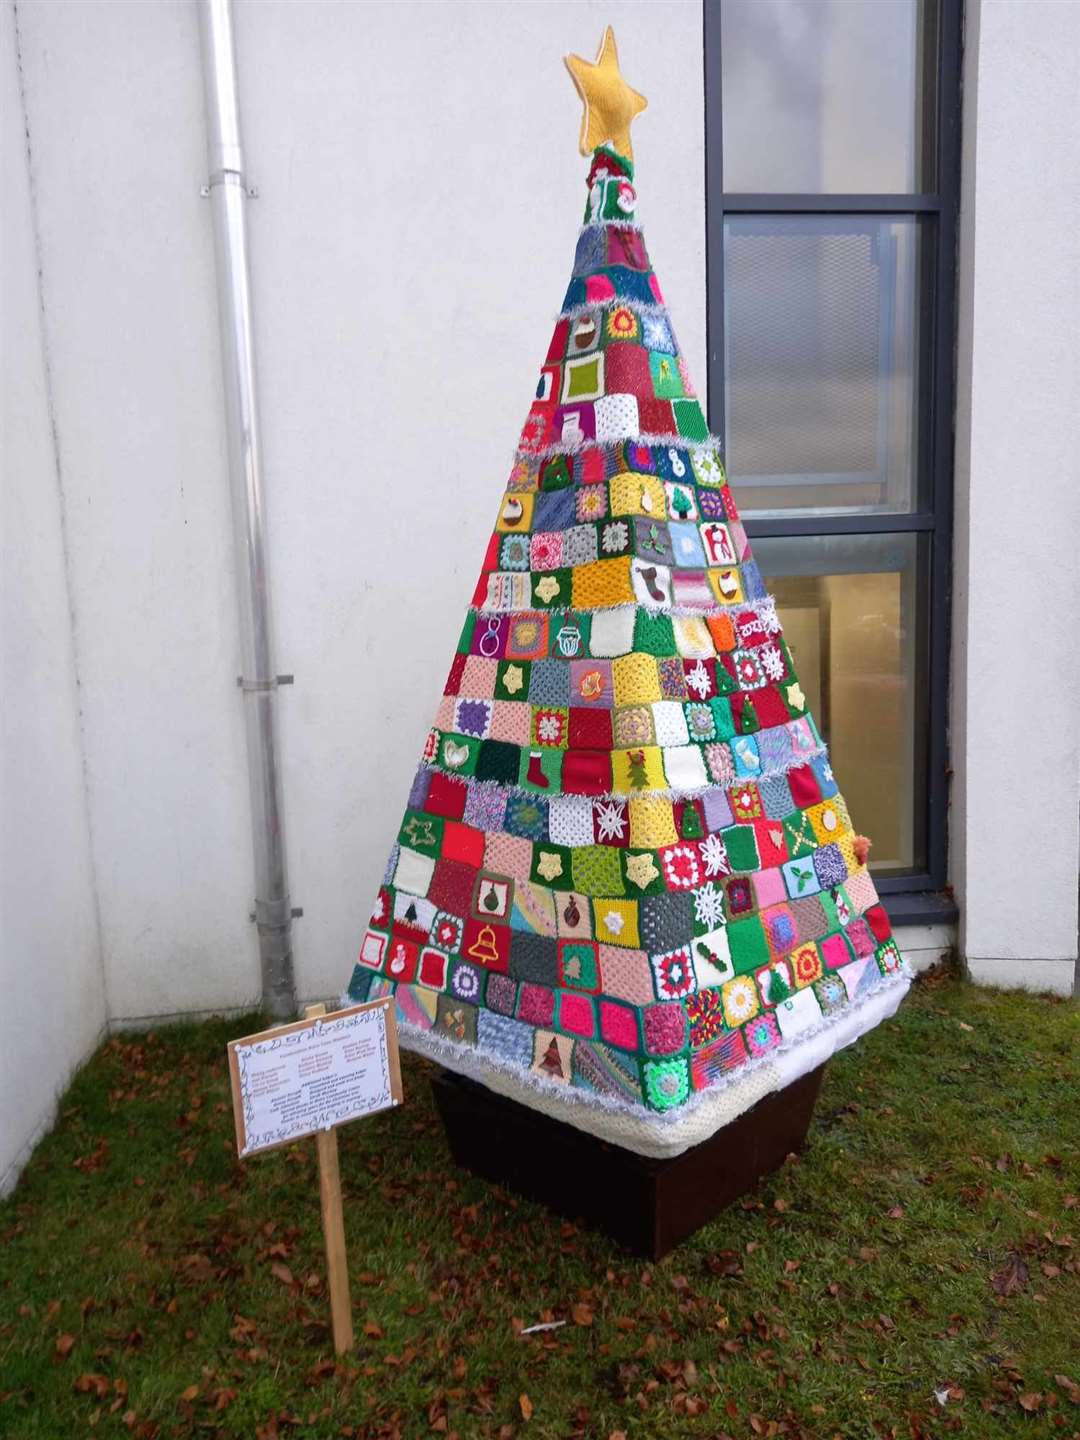 The Christmas tree at the community centre.